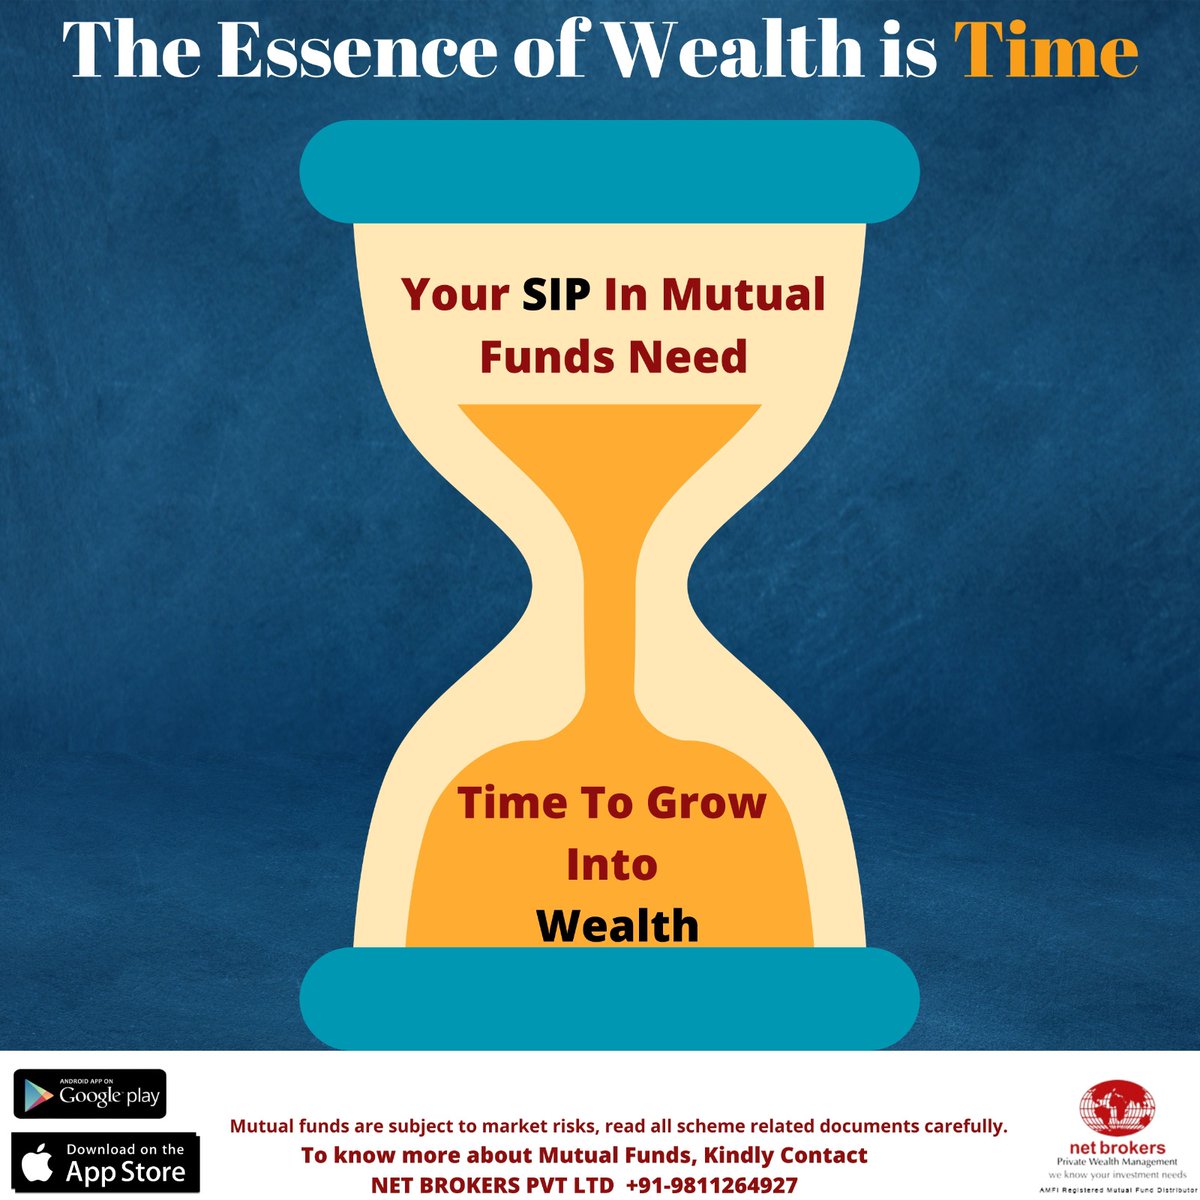 Let time work its magic on your investments. 

Stay invested.

#sip #mutualfundsahihai #mutualfunds #sipsahihai #investments #goal